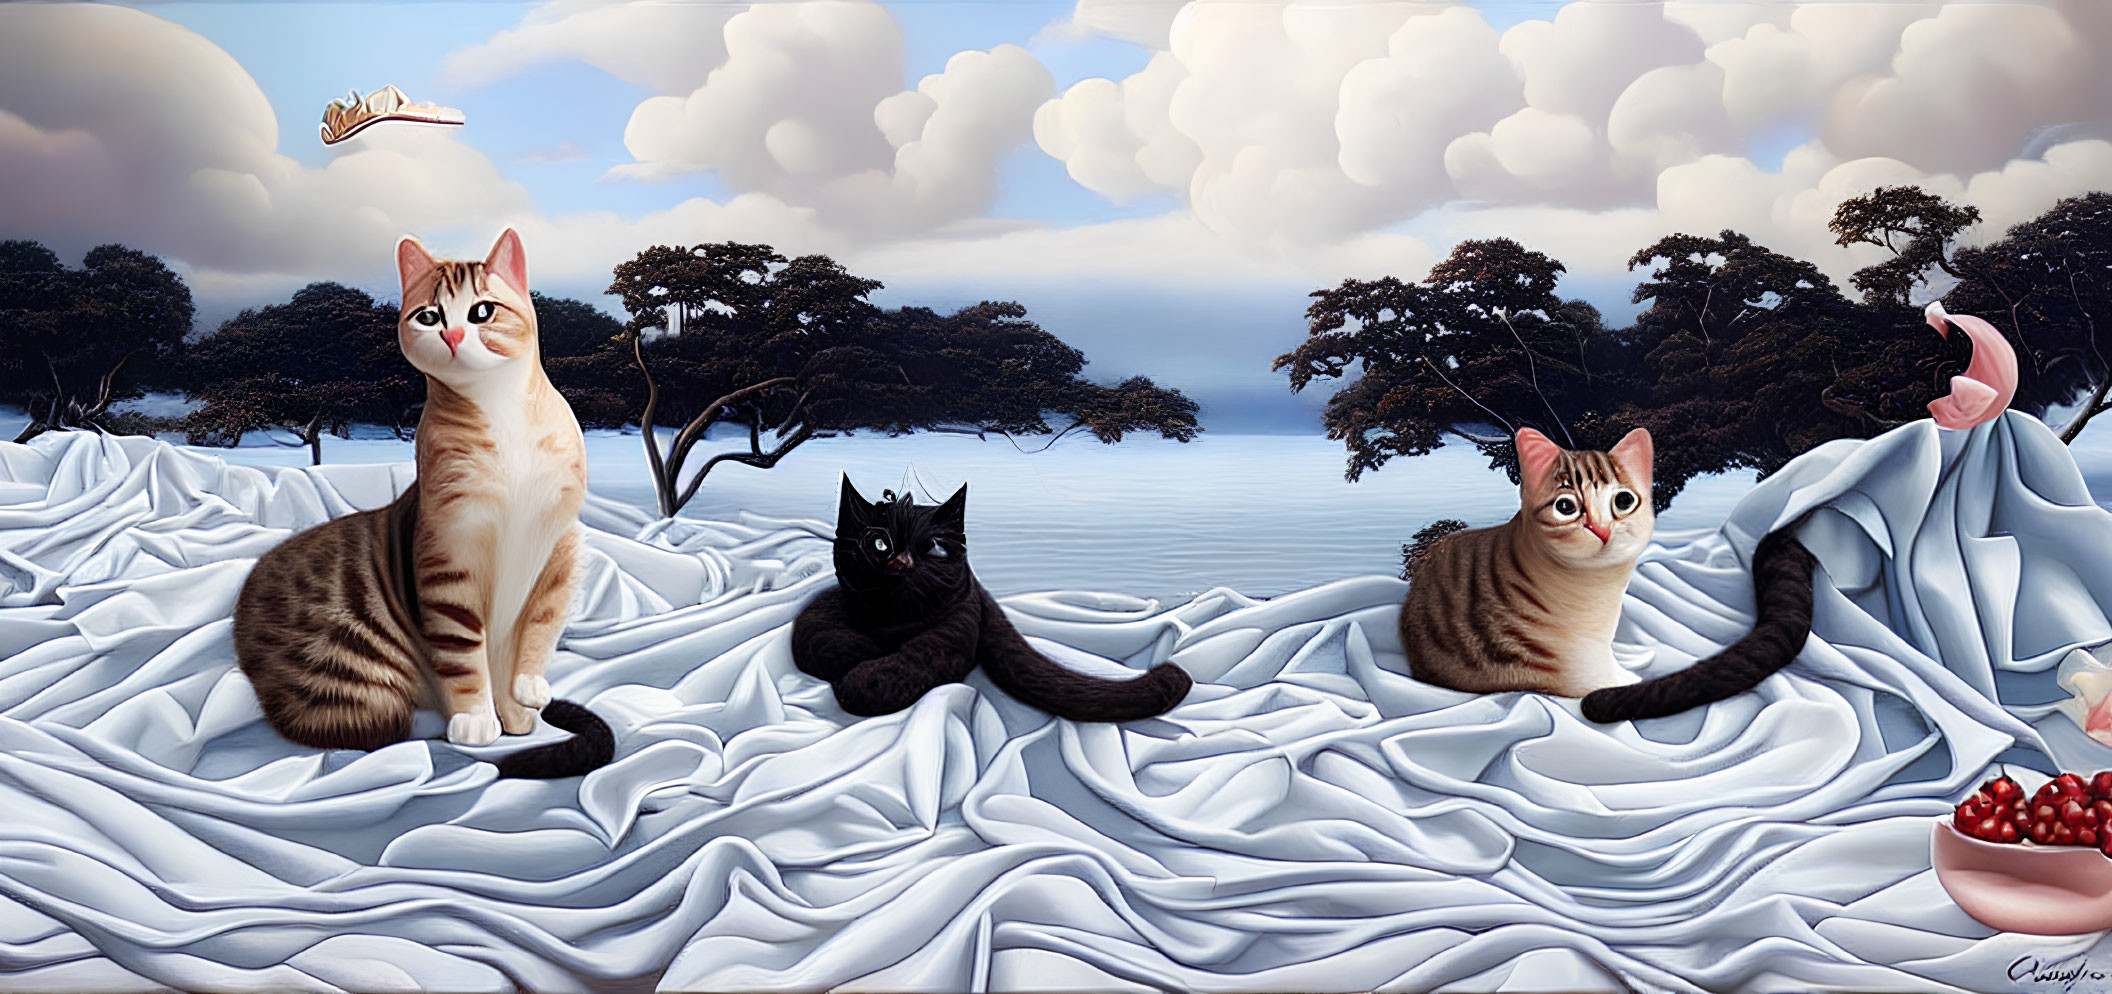 Three cats on draped fabric with trees, clouds, pomegranate, bird, and flamingo